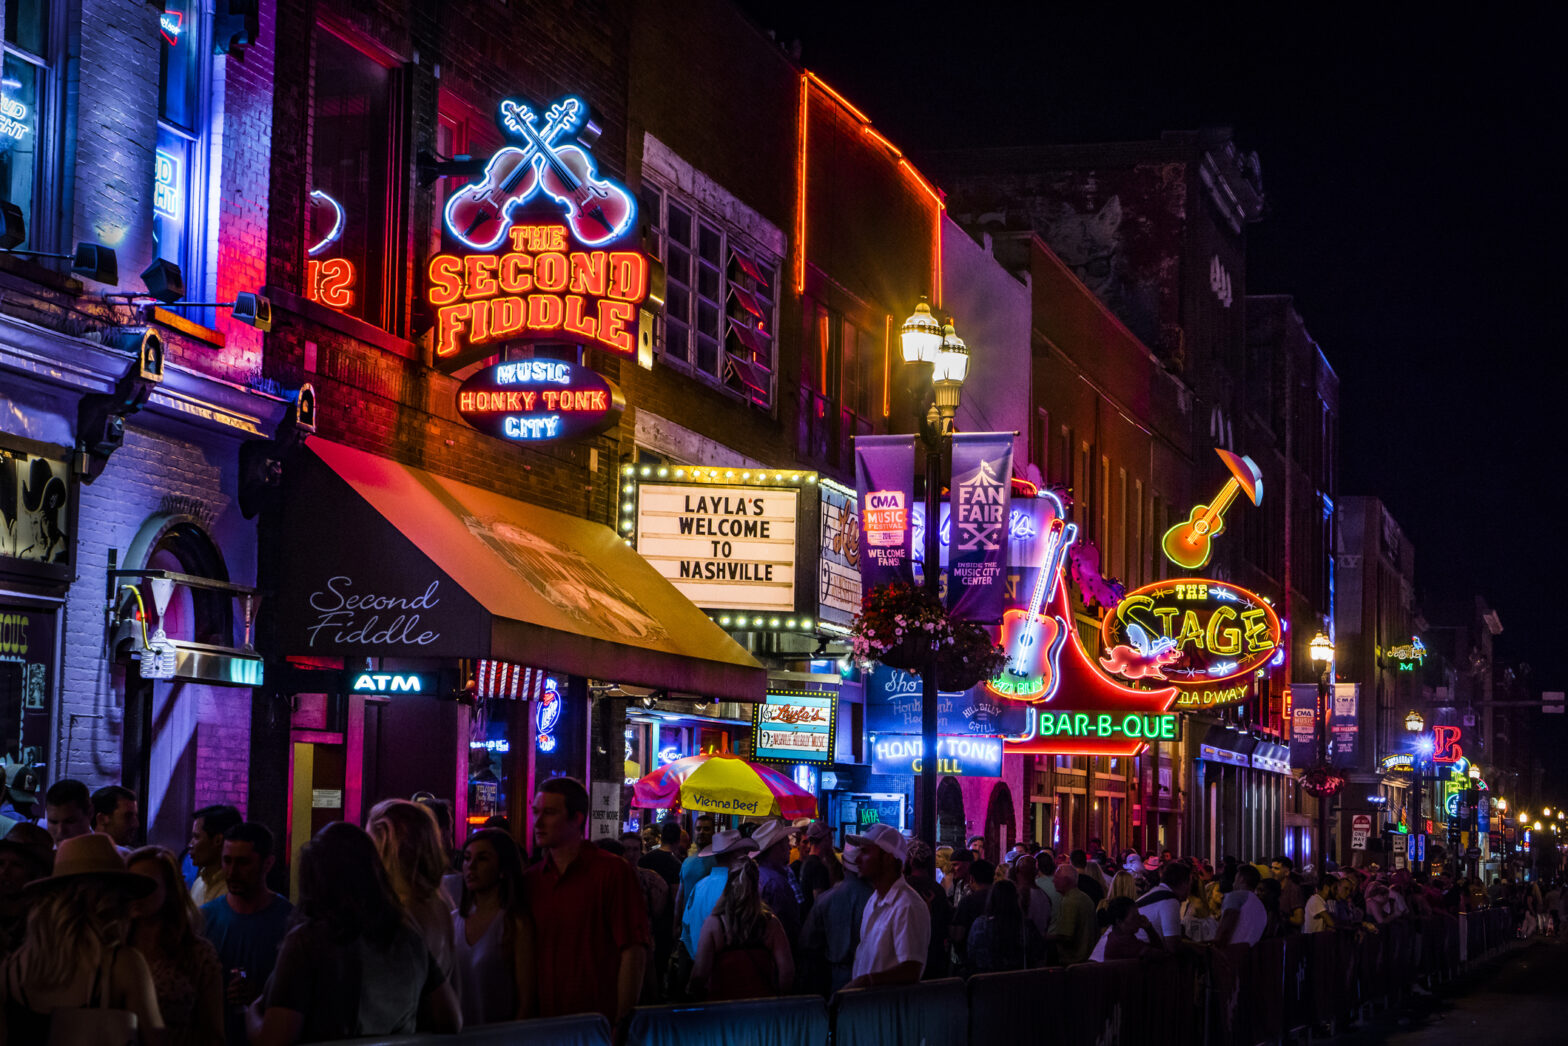 10 Best Things To Do In Nashville, TN for Community and Culture